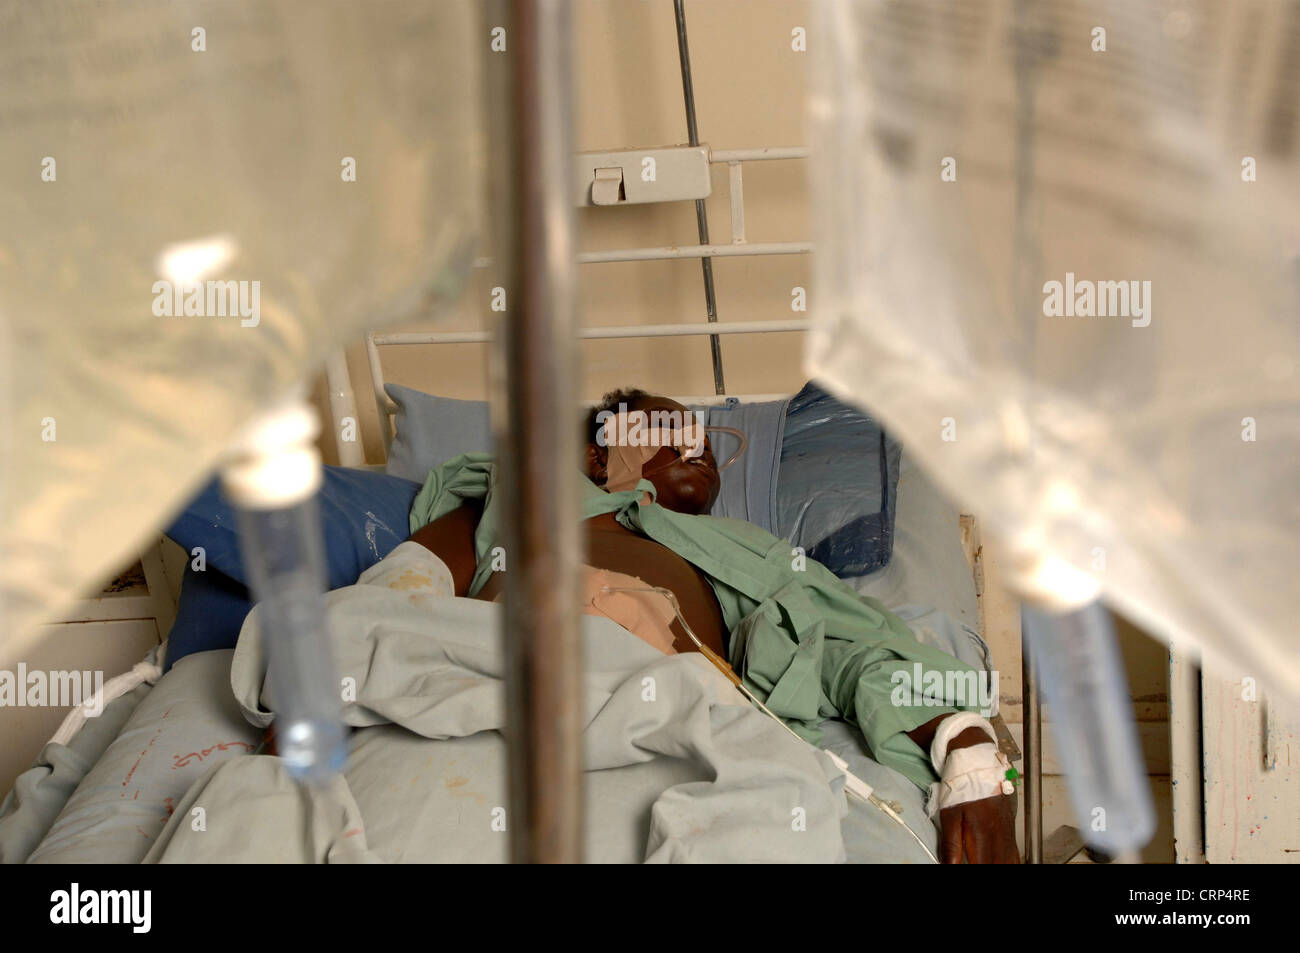 Image shows comatosed snake bite victim. The victim is on peritoneal dialysis. Stock Photo